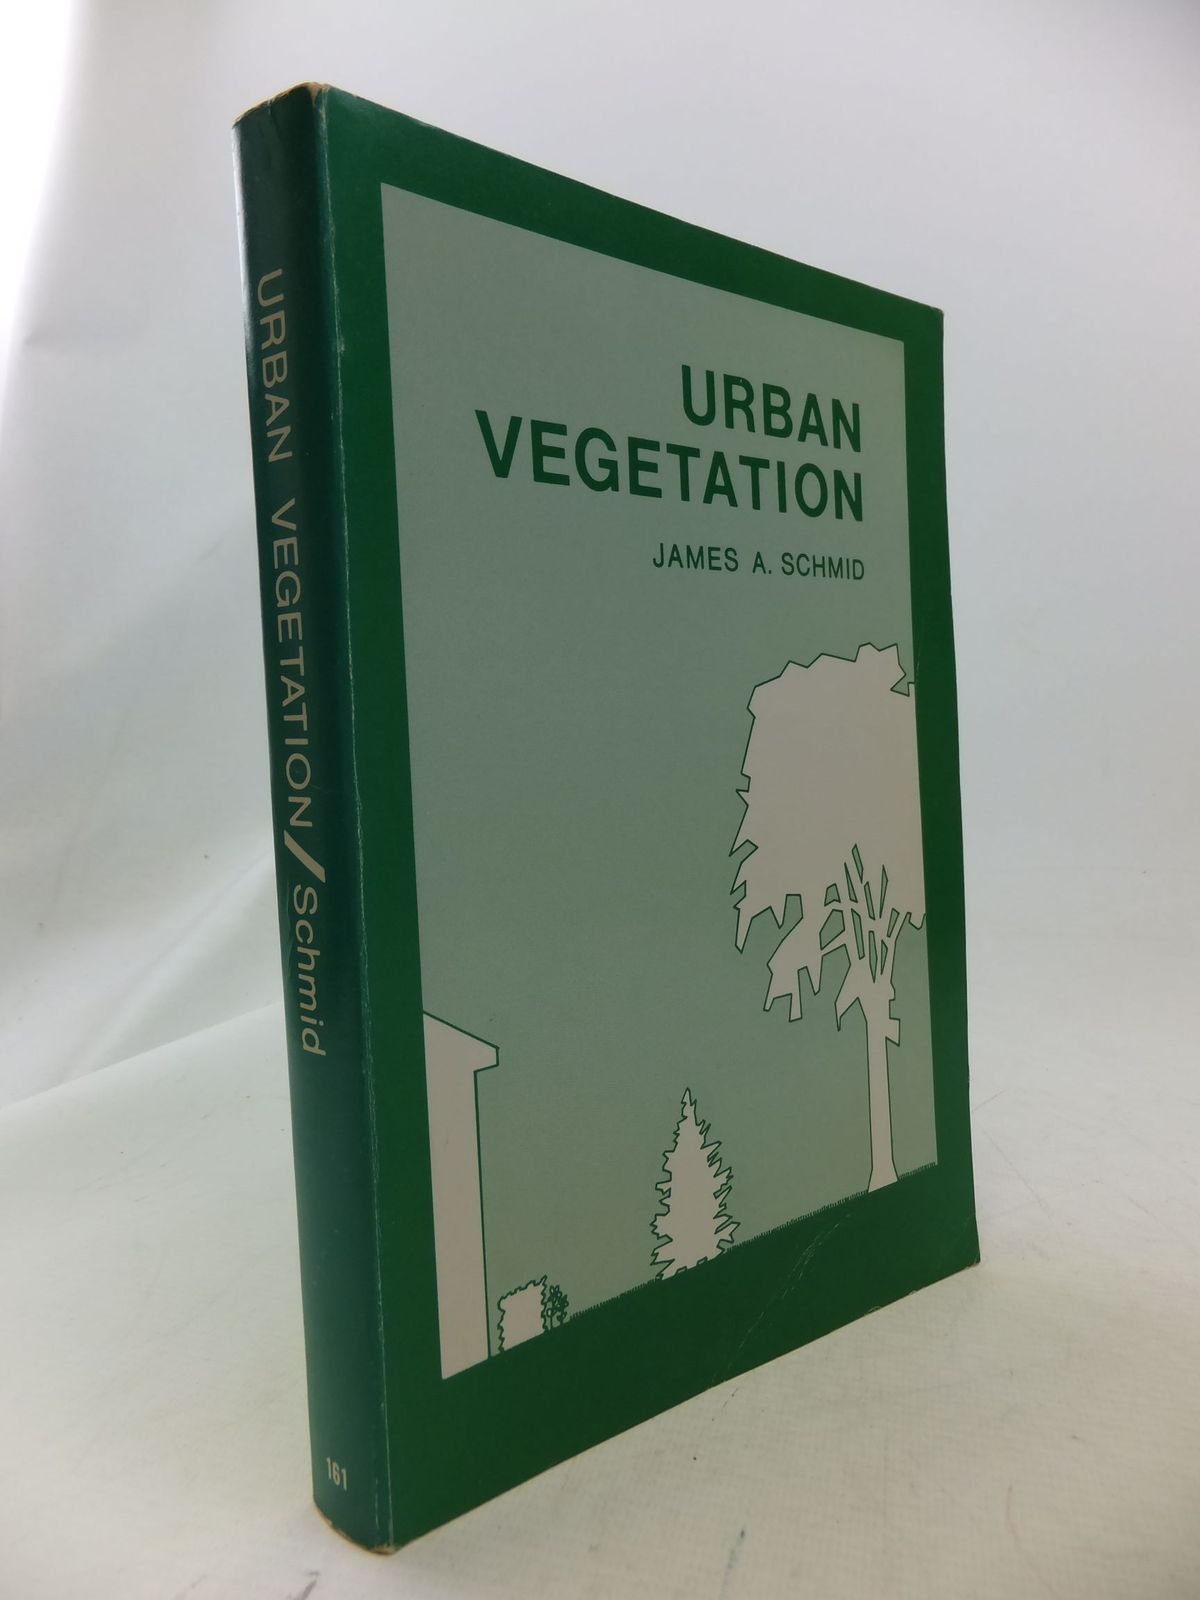 Photo of URBAN VEGETATION A REVIEW AND CHICAGO CASE STUDY written by Schmid, James A. published by University of Chicago Press (STOCK CODE: 1710842)  for sale by Stella & Rose's Books